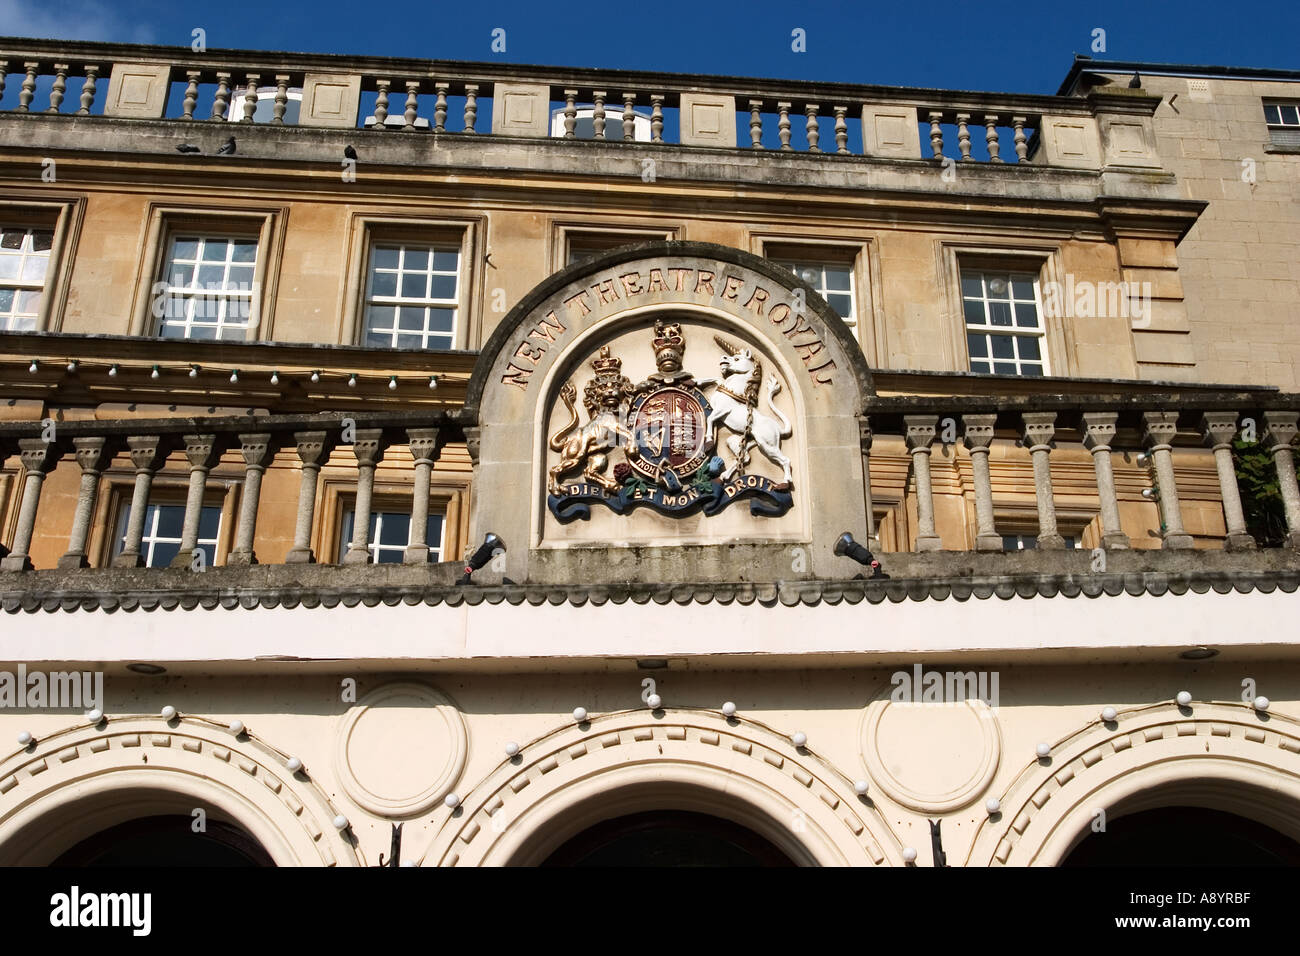 Coat of Arms above the entrance to the New Theatre Royal in Bath Somerset England Stock Photo